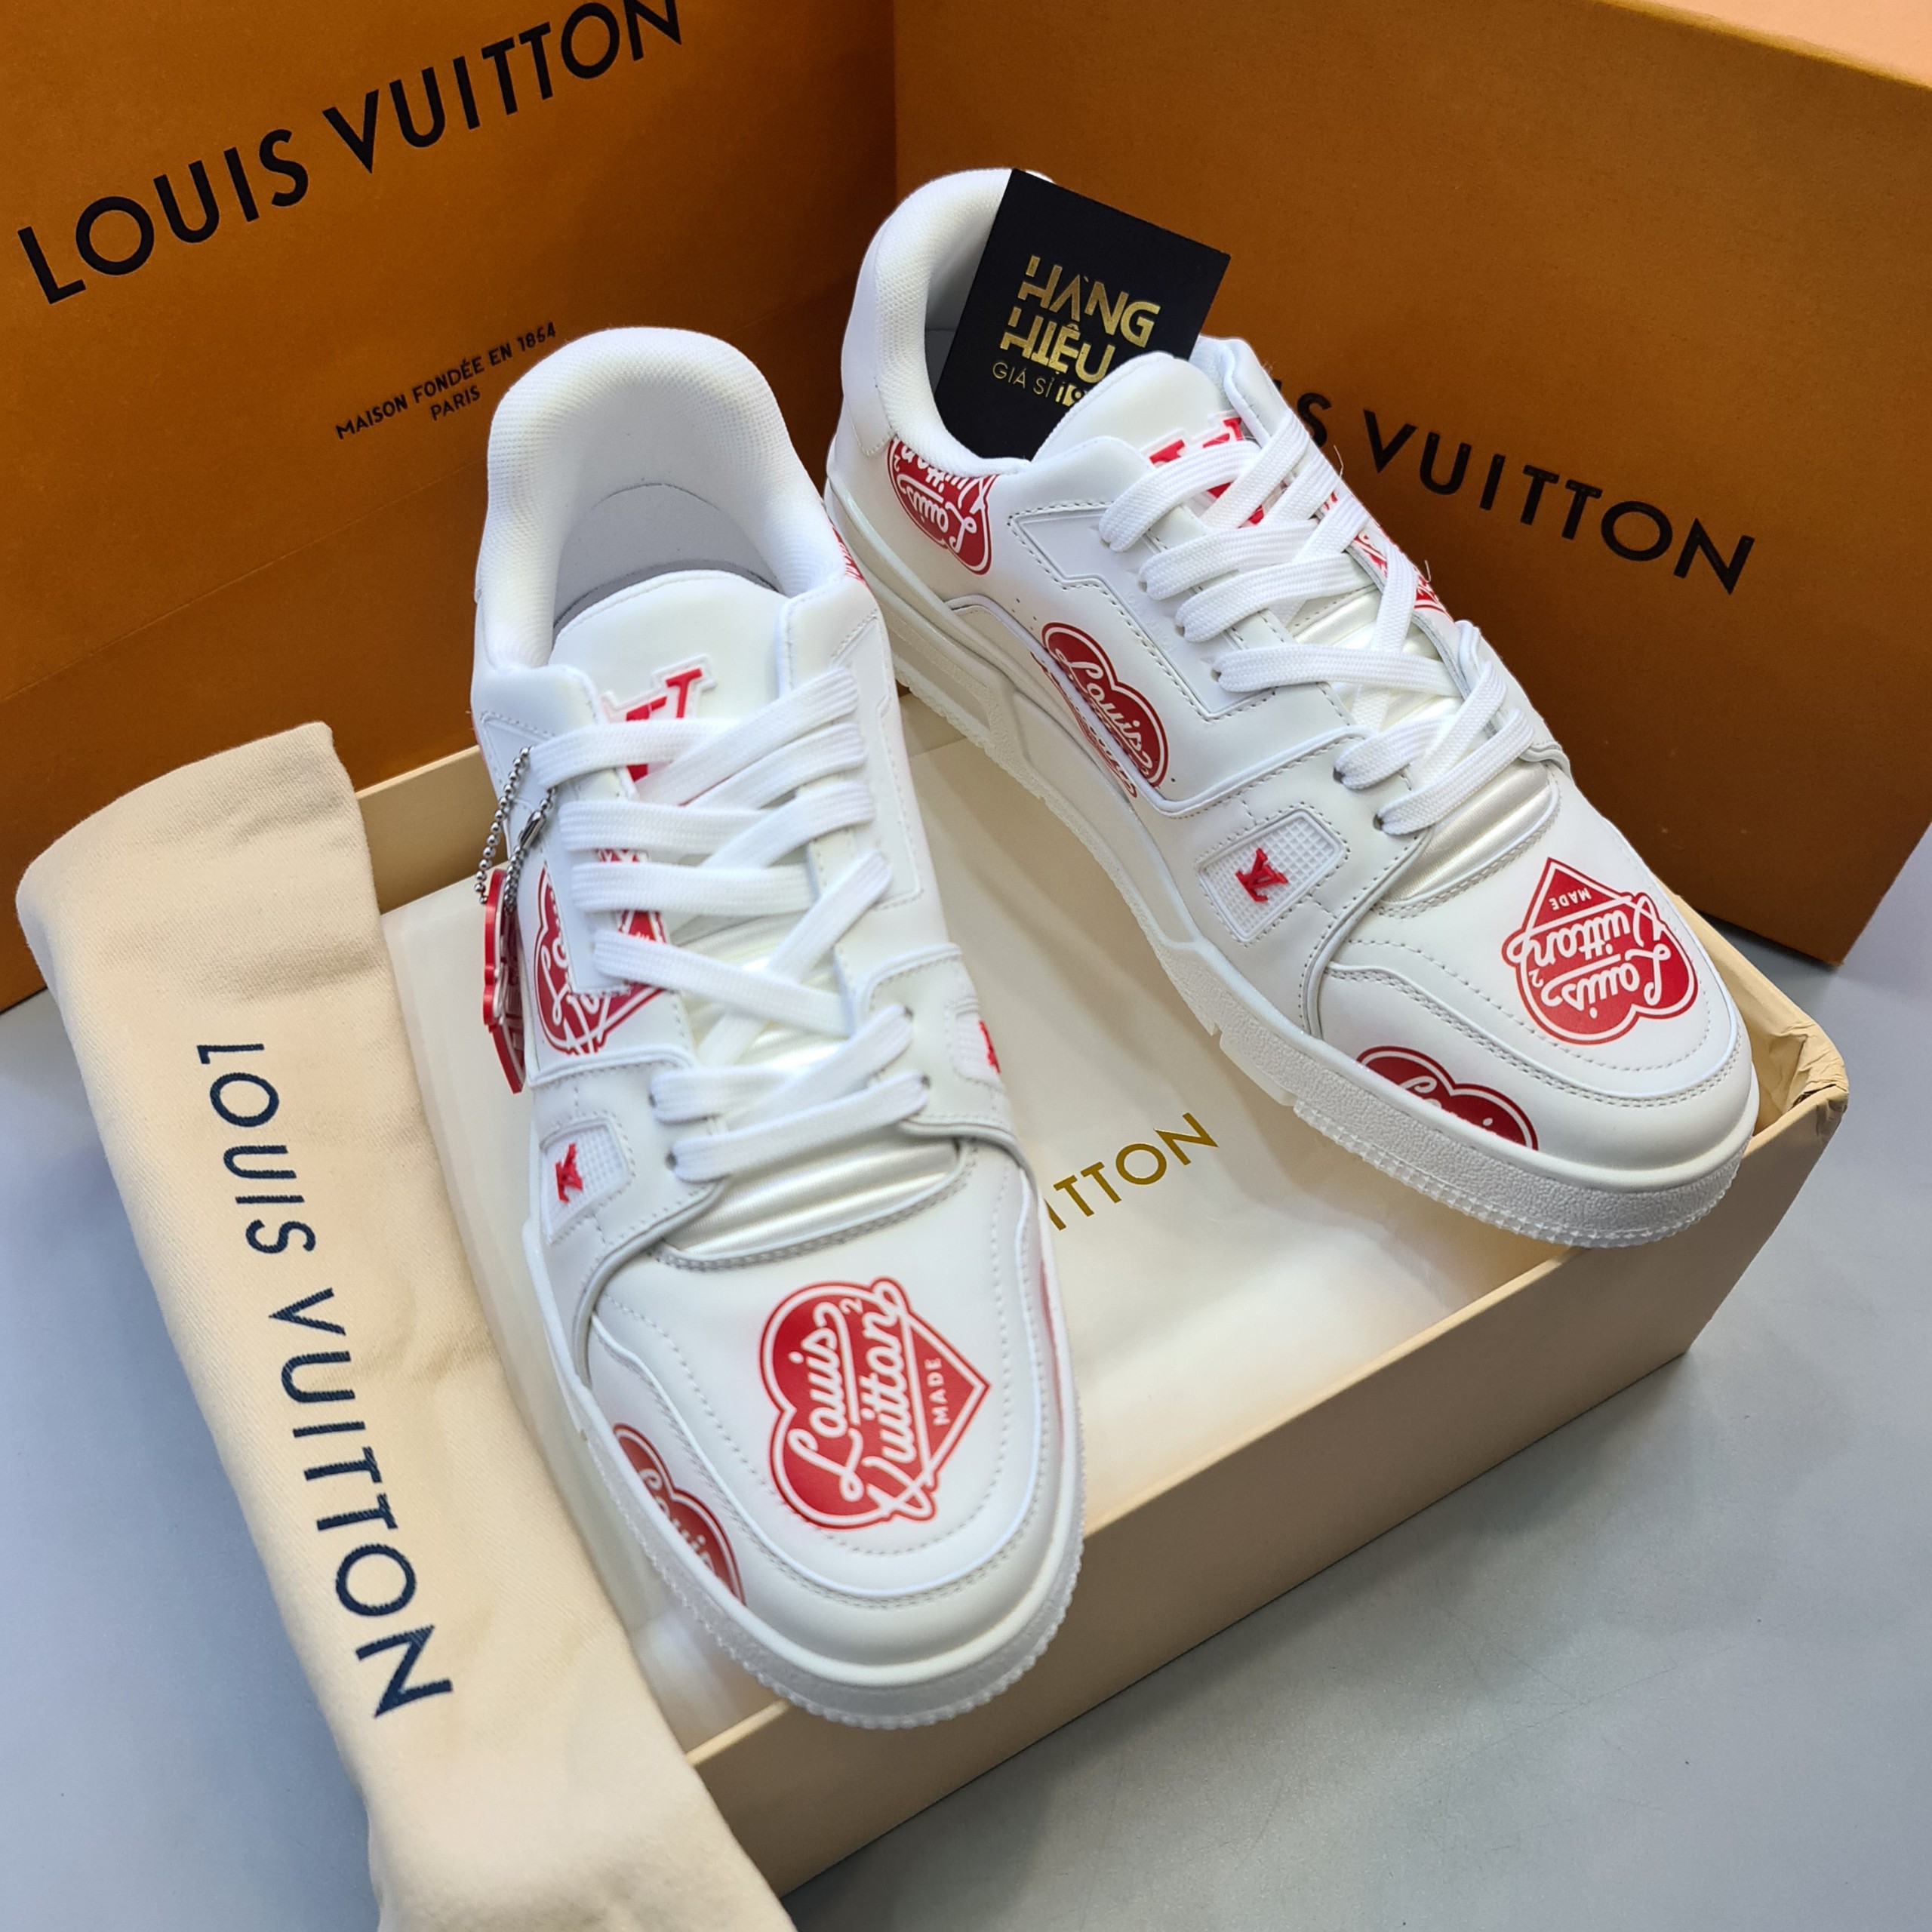 Louis Vuittons First Sustainable Shoe Is Made With Vegan Corn Leather   VegNews